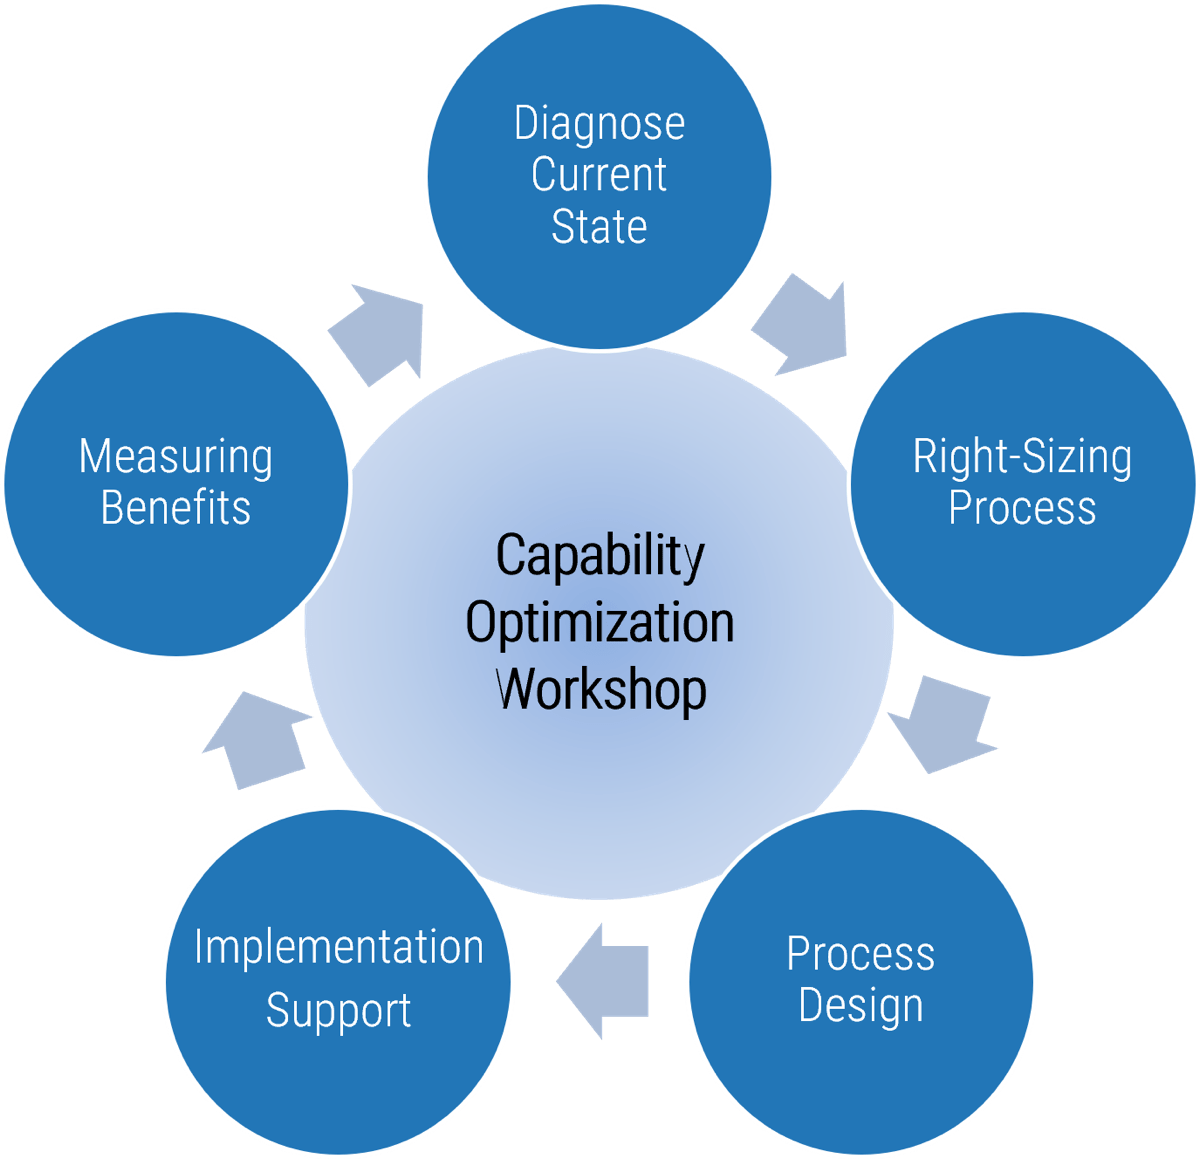 Cycle titled 'Capability Optimization Workshop' with steps 'Diagnose Current State', 'Right-Sizing Process', 'Process Design', 'Implementation Support', and 'Measuring Benefits'.